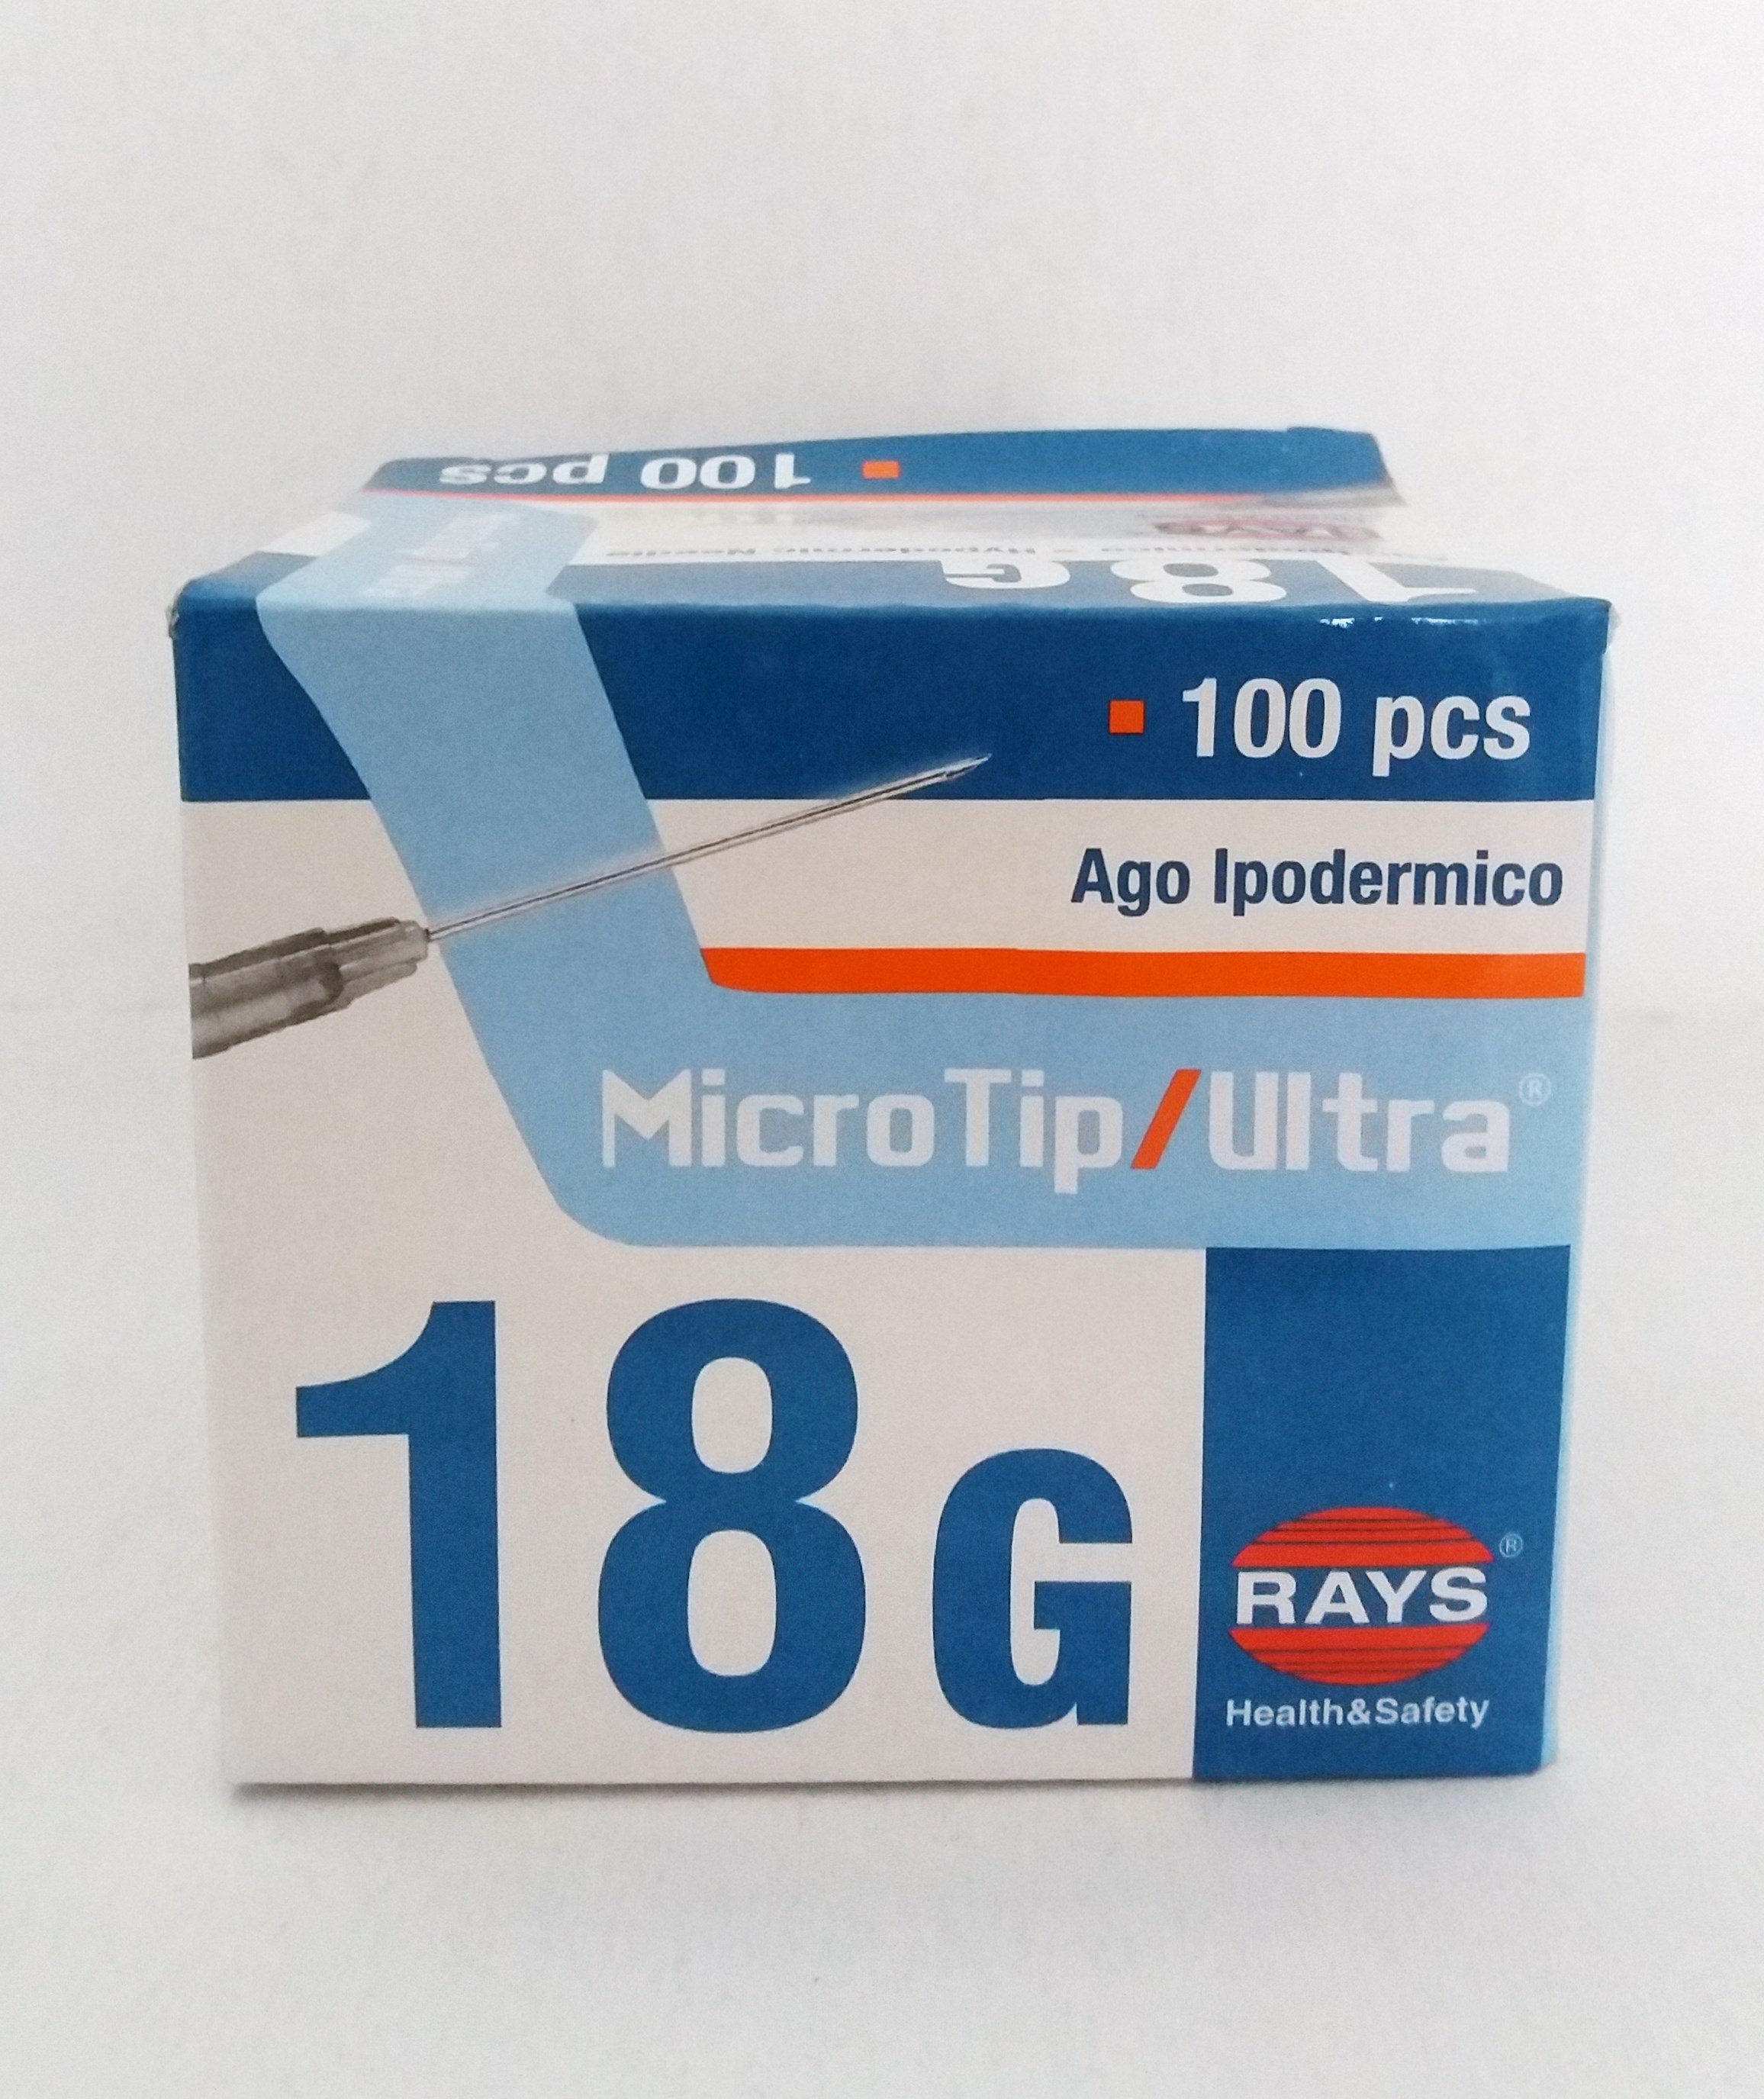 Disposable needles MicroTip/Ultra 18G x 1 1/2" (1.2 x 40 mm)